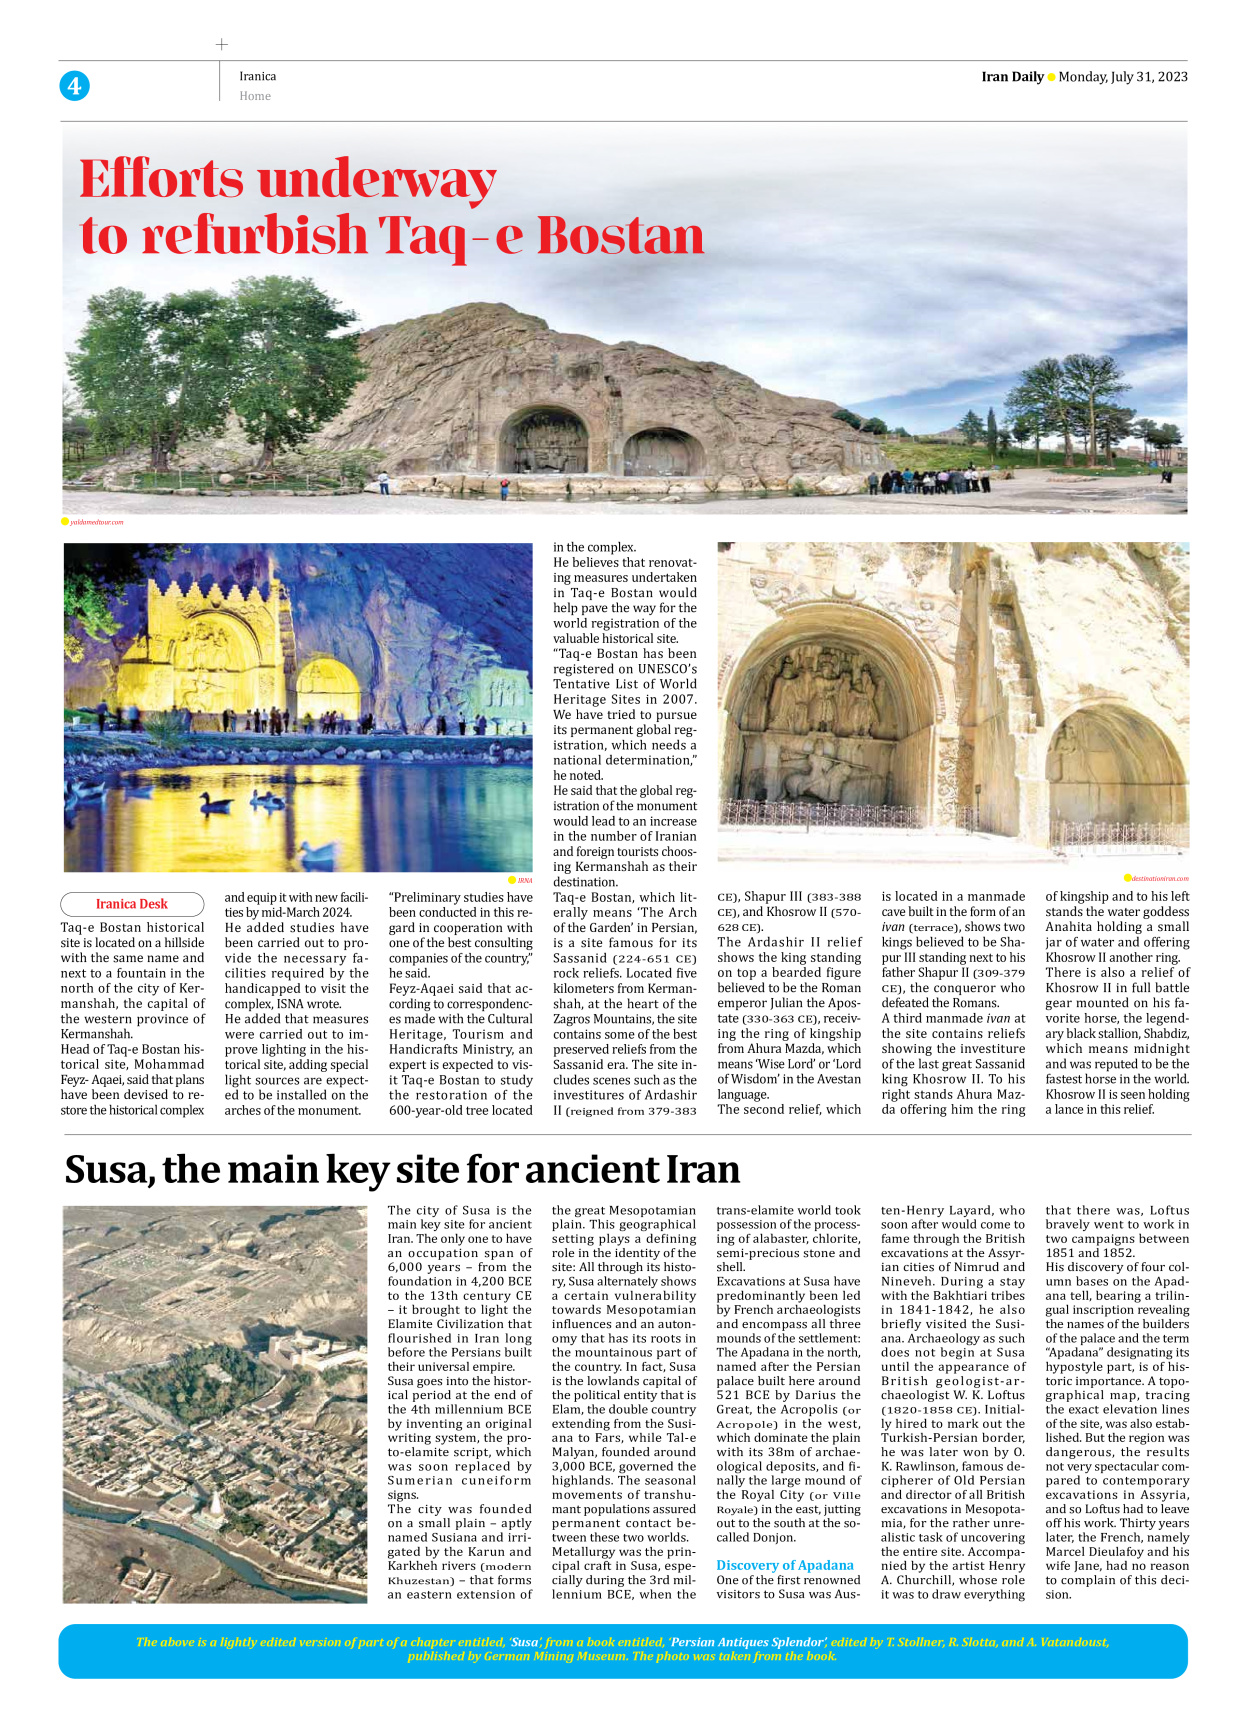 Iran Daily - Number Seven Thousand Three Hundred and Fifty Two - 31 July 2023 - Page 4